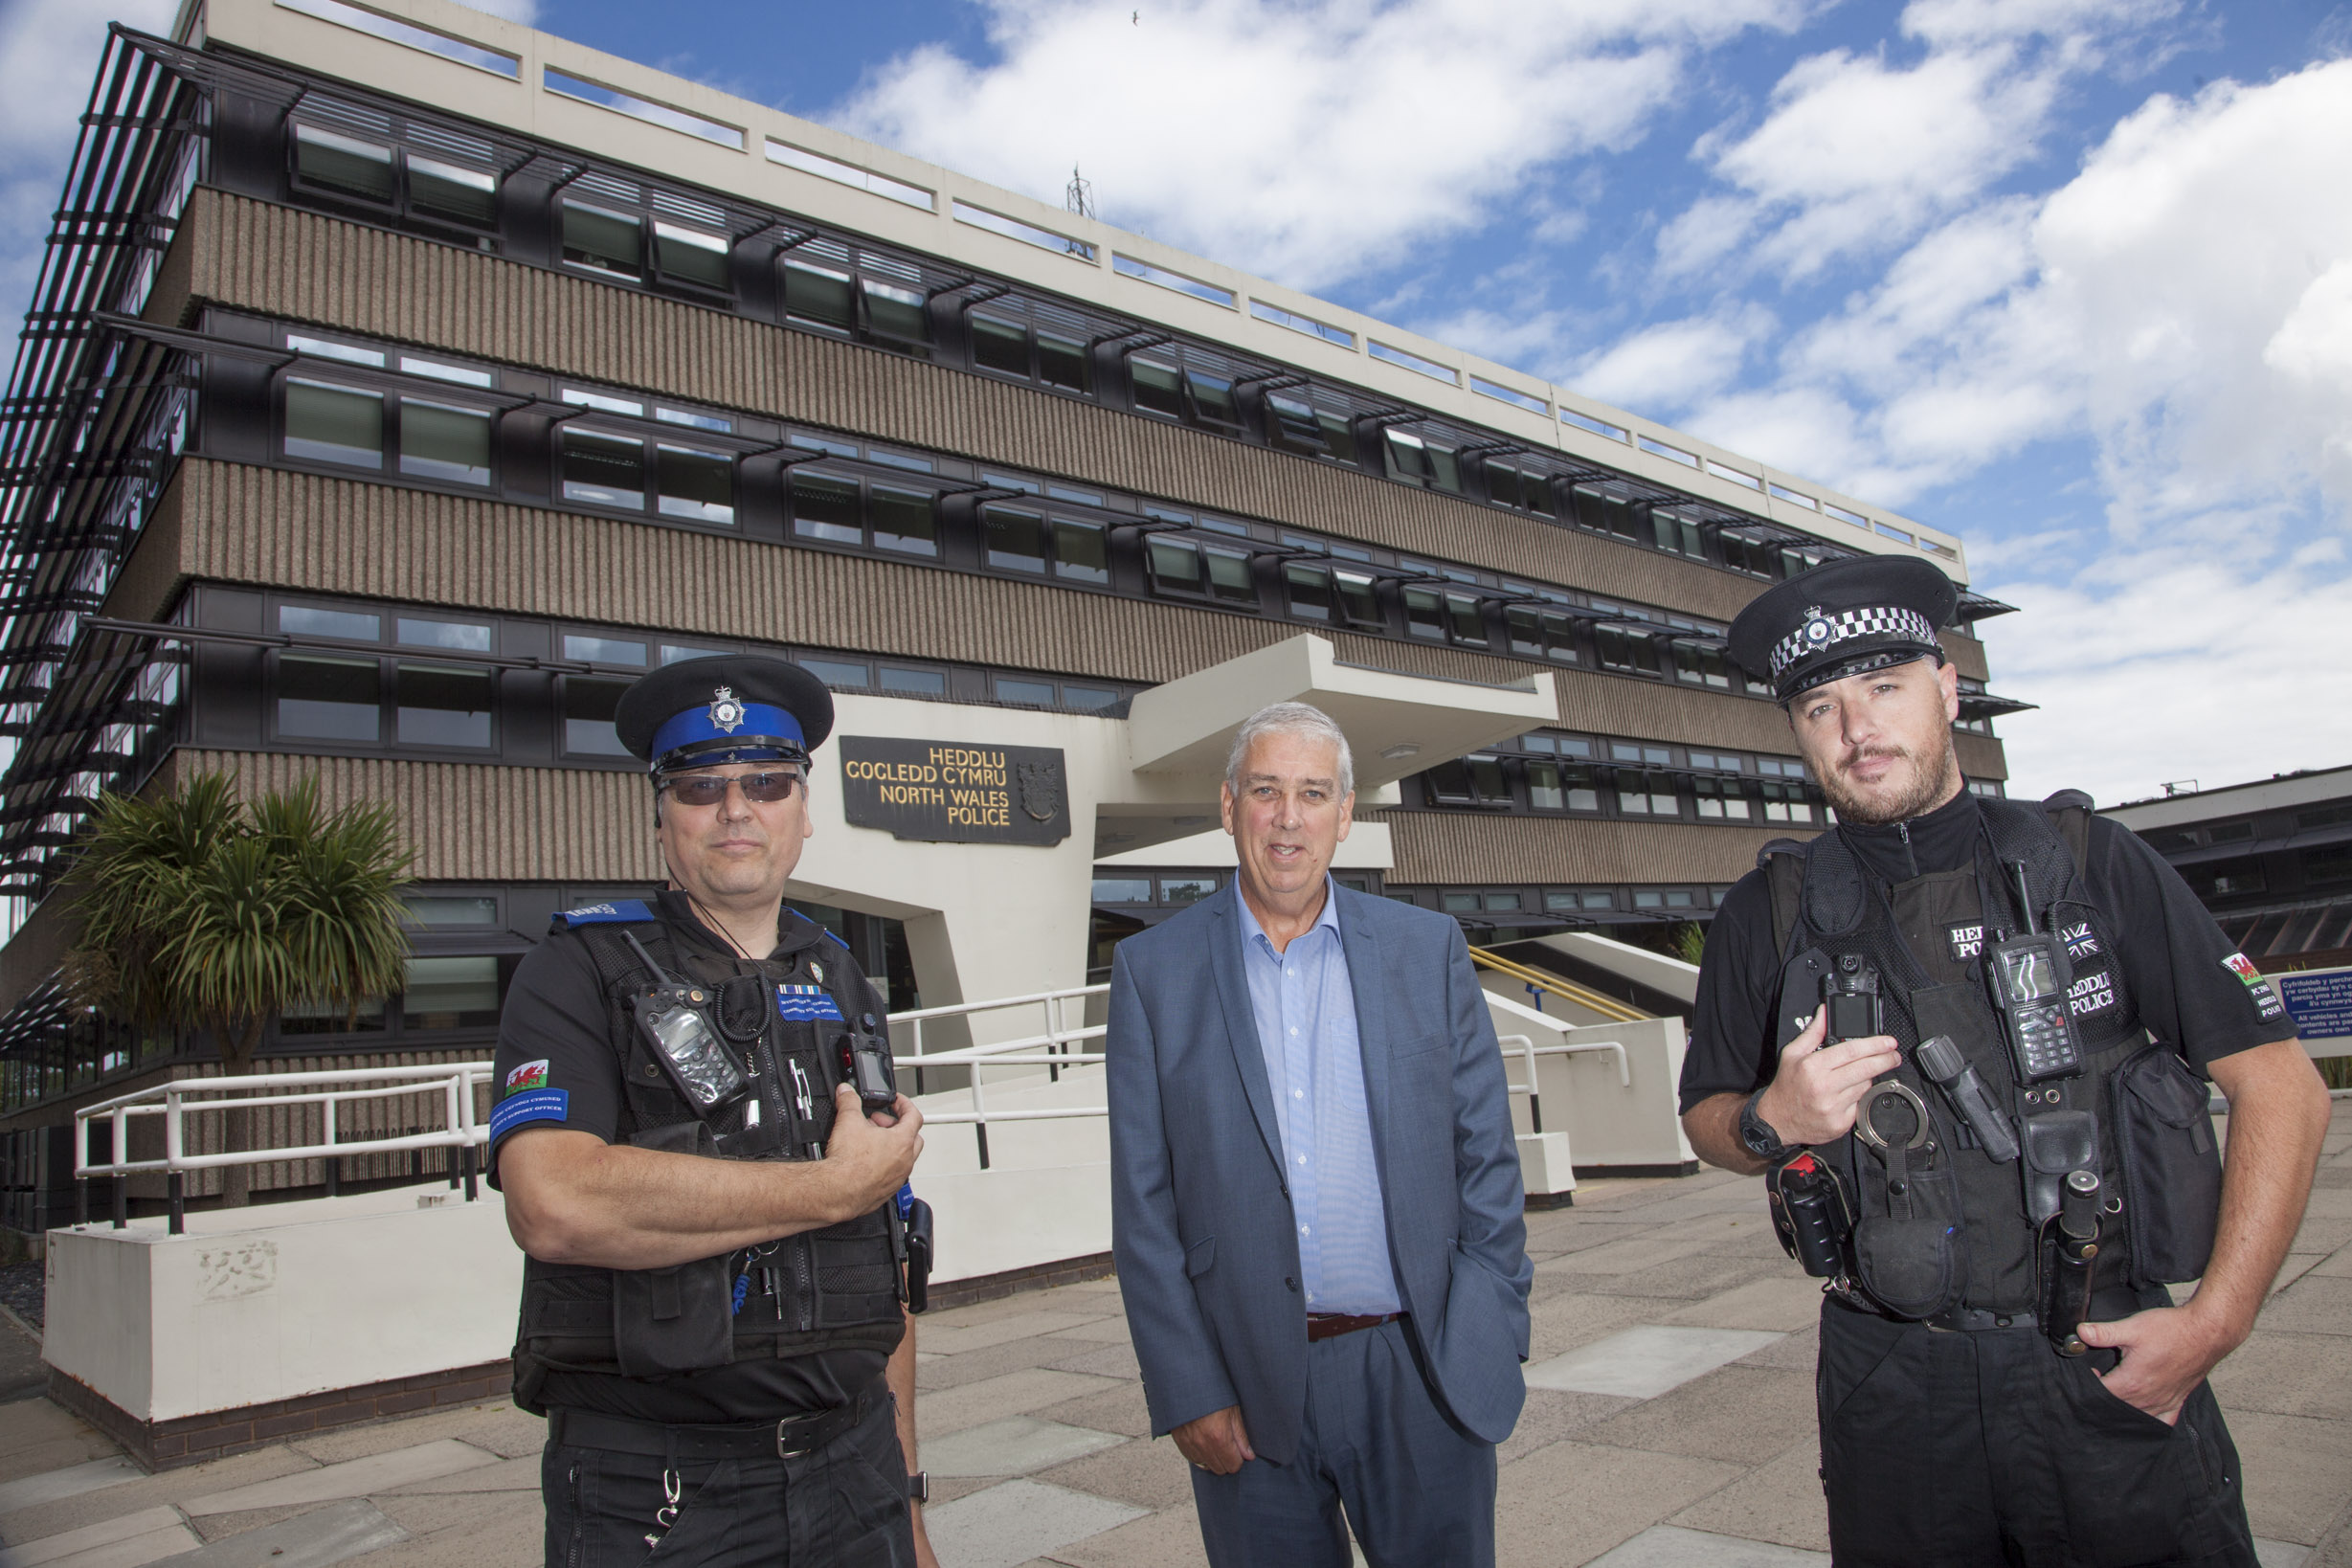 BODY WORN VIDEO...PCC Arfon Jones with PCSO Chris Perkins and PC Martin Taylor at North Wales Police Headquarters.